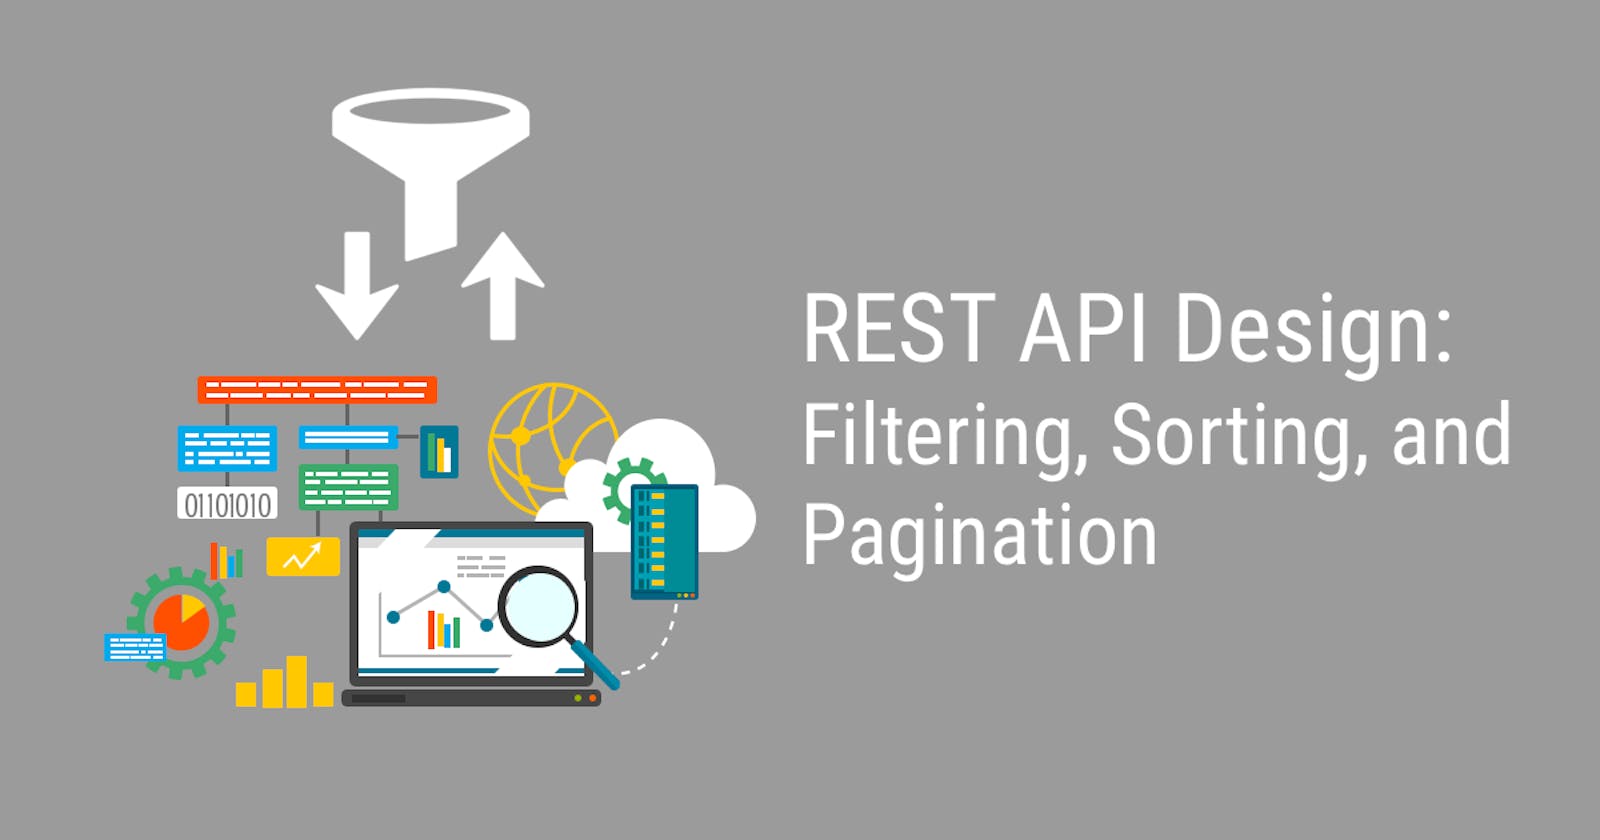 Filtering, Sorting, and Paging for ASP.NET Core REST APIs Part 1